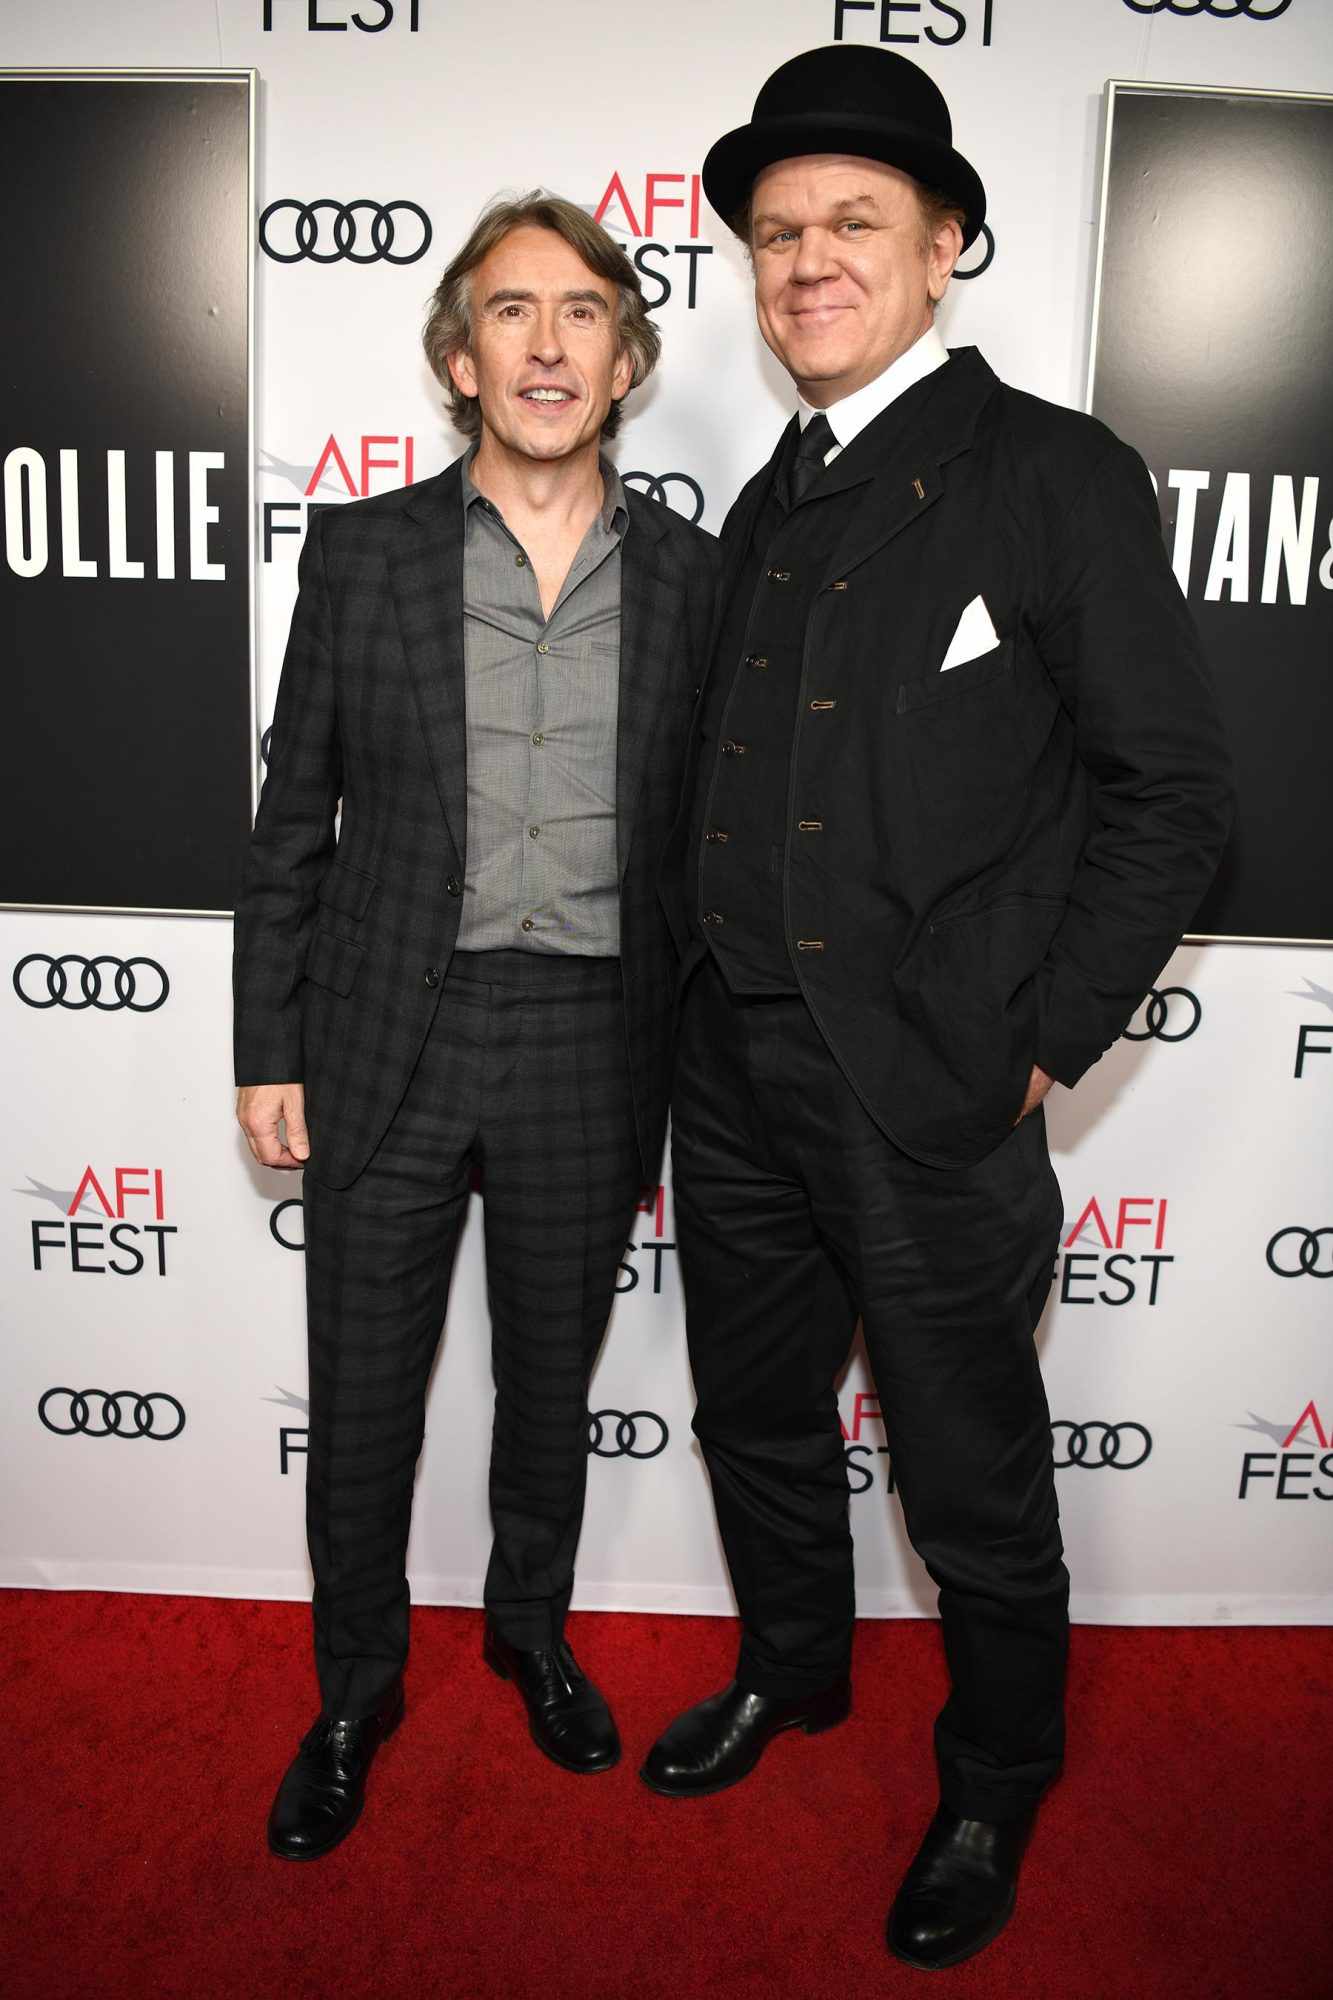 AFI FEST 2018 Presented By Audi - "Stan & Ollie" Special Screening